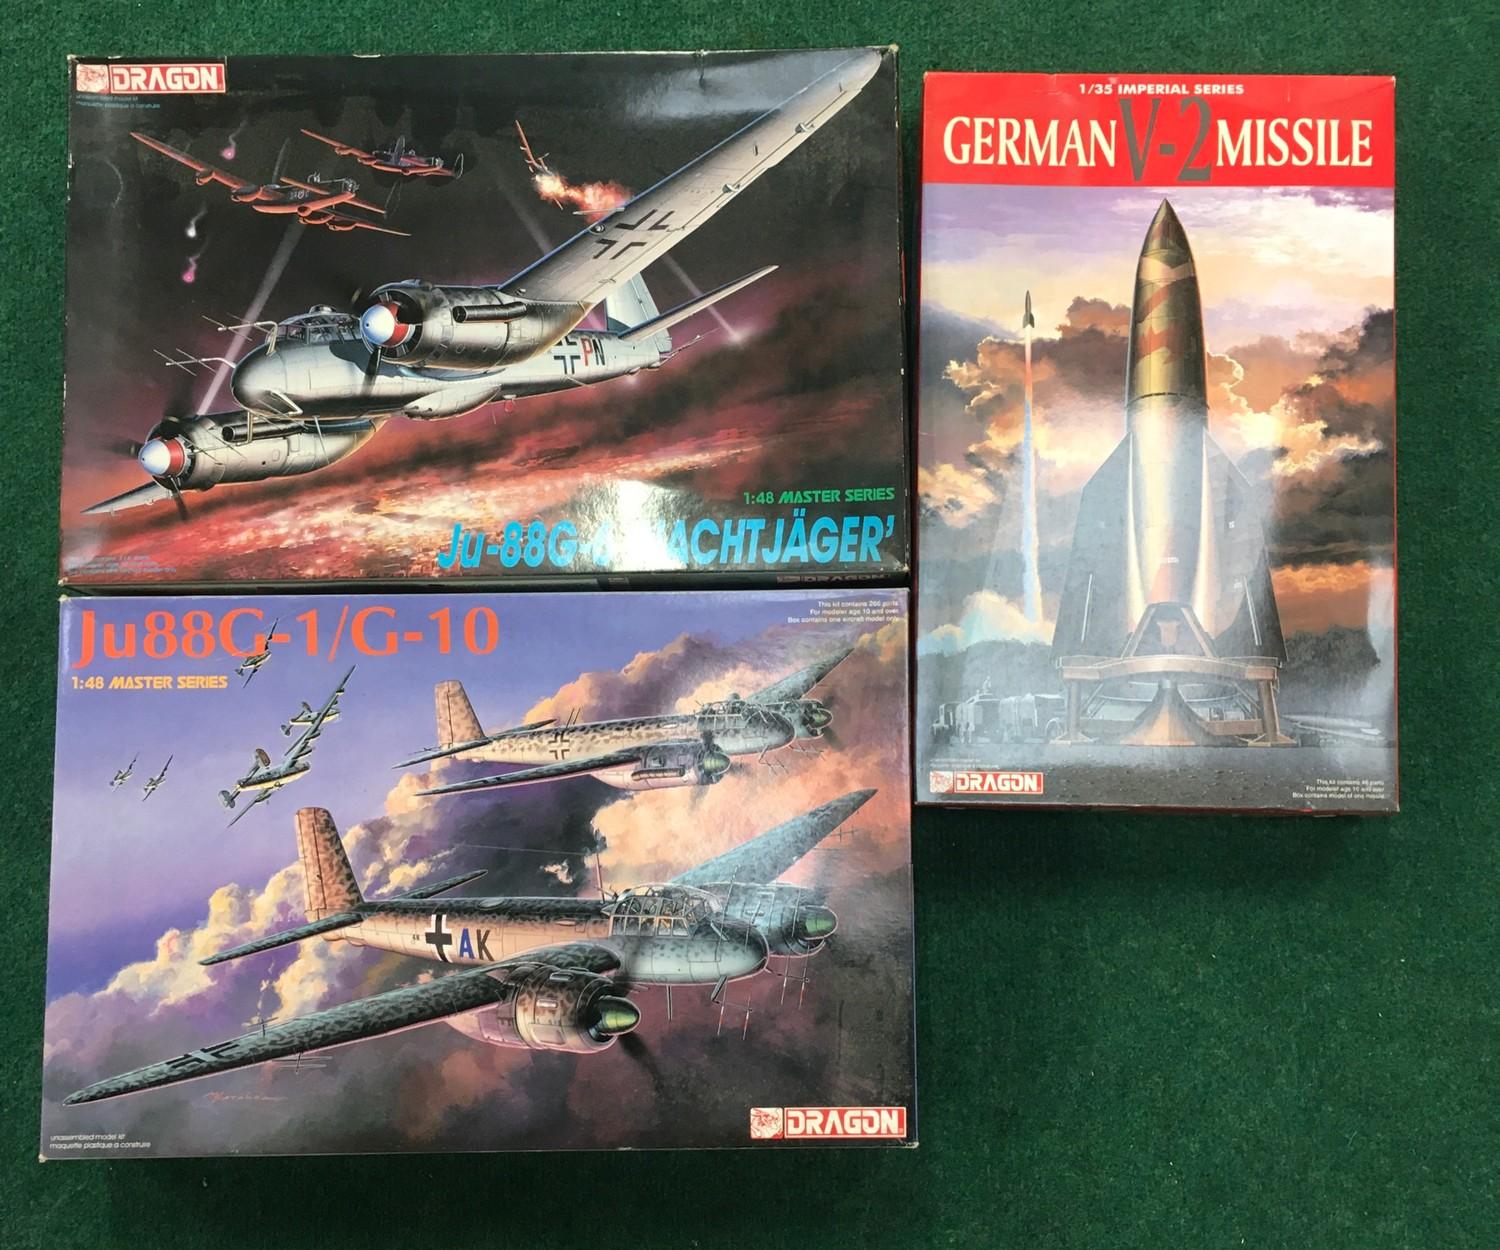 Three model kits by Dragon to include German V-2 Missile, Ju-88G-6 ?Nachtjager? and Ju88G-1/G-10.